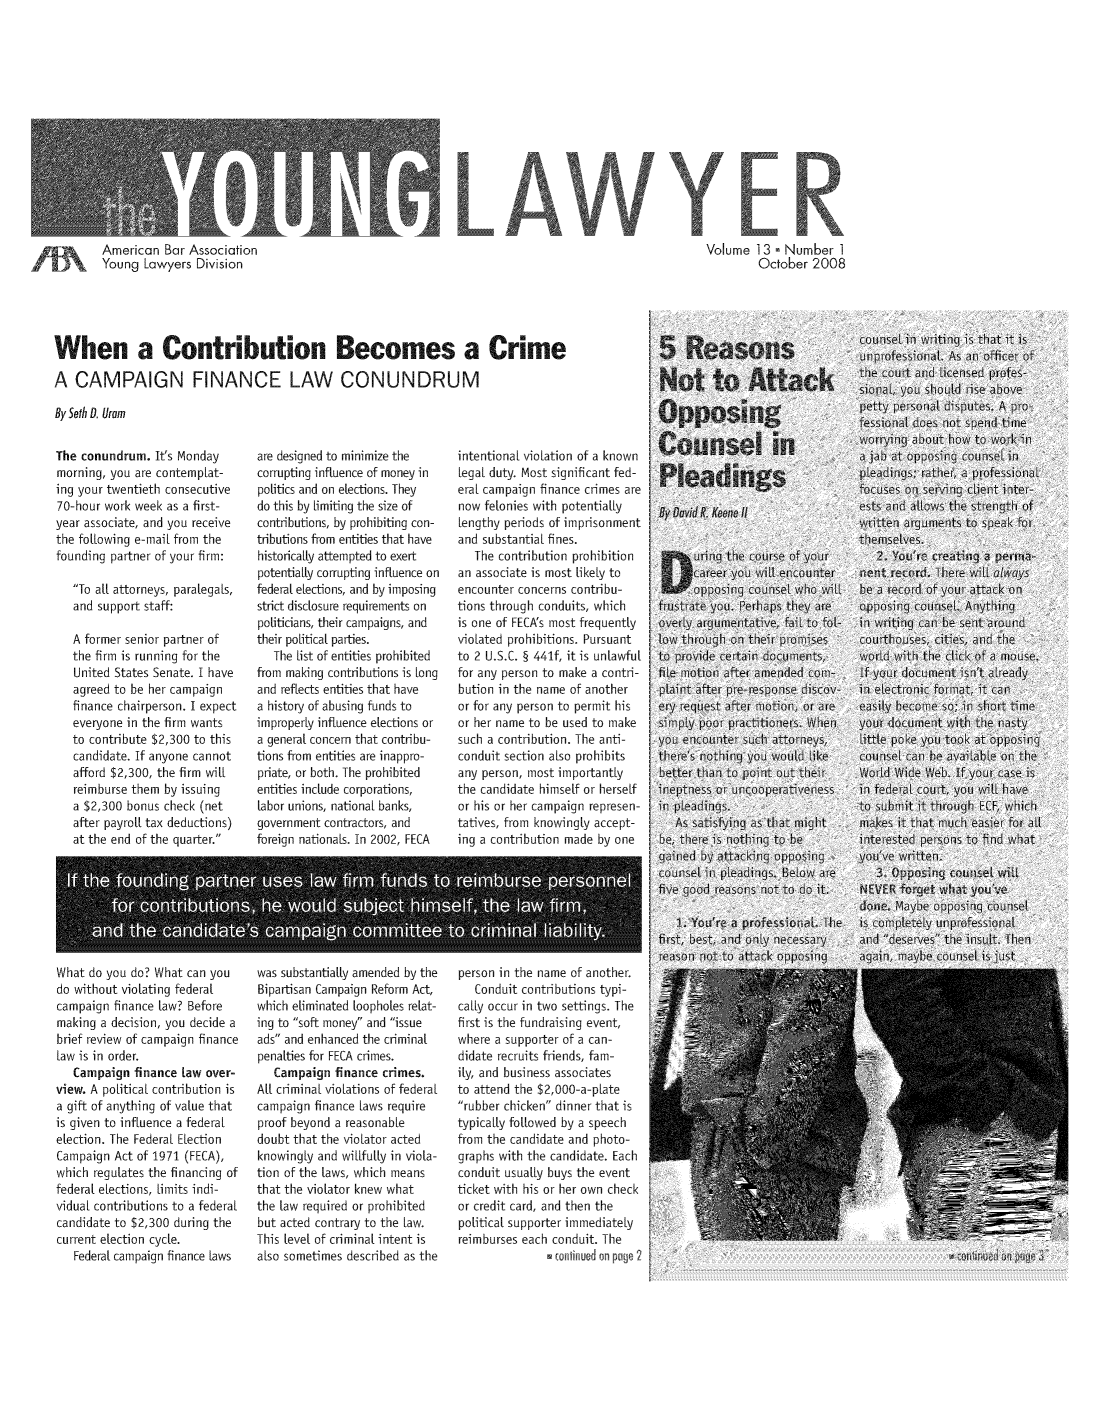 handle is hein.journals/yglwyr13 and id is 1 raw text is: 














        American Bar Association
        Young Lawyers Division





When a Contribution Becomes a Crime

A CAMPAIGN FINANCE LAW CONUNDRUM

By Seth D. Uram


Volume 13 Number 1
         October 2008


The conundrum. It's Monday
morning, you are contempLat-
ing your twentieth consecutive
70-hour work week as a first-
year associate, and you receive
the folLowing e-maiL from the
founding partner of your firm:
   To al attorneys, paralegaLs,
   and support staff:

   A former senior partner of
   the firm is running for the
   United States Senate. I have
   agreed to be her campaign
   finance chairperson. I expect
   everyone in the firm wants
   to contribute $2,300 to this
   candidate. If anyone cannot
   afford $2,300, the firm will
   reimburse them by issuing
   a $2,300 bonus check (net
   after payroll tax deductions)
   at the end of the quarter.


are designed to minimize the
corrupting influence of money in
politics and on elections. They
do this by Limiting the size of
contributions, by prohibiting con-
tributions from entities that have
historicaLly attempted to exert
potentiaLly corrupting influence on
federal elections, and by imposing
strict disclosure requirements on
politicians, their campaigns, and
their poLitical parties.
   The List of entities prohibited
from making contributions is Long
and reflects entities that have
a history of abusing funds to
improperly influence elections or
a general concern that contribu-
tions from entities are inappro-
priate, or both. The prohibited
entities include corporations,
Labor unions, national banks,
government contractors, and
foreign nationals. In 2002, FECA


intentional violation of a known
Legal duty. Most significant fed-
eraL campaign finance crimes are
now felonies with potentialLy
Lengthy periods of imprisonment
and substantial fines.
   The contribution prohibition
an associate is most LikeLy to
encounter concerns contribu-
tions through conduits, which
is one of FECA's most frequently
violated prohibitions. Pursuant
to 2 U.S.C. § 441f, it is unlawful
for any person to make a contri-
bution in the name of another
or for any person to permit his
or her name to be used to make
such a contribution. The anti-
conduit section also prohibits
any person, most importantly
the candidate himself or herself
or his or her campaign represen-
tatives, from knowingly accept-
ing a contribution made by one


*      6 .6.e                                S        6 -6-07


What do you do? What can you
do without violating federal
campaign finance Law? Before
making a decision, you decide a
brief review of campaign finance
Law is in order.
   Campaign finance Law over-
view. A poLiticaL contribution is
a gift of anything of value that
is given to influence a federal
election. The Federal ELection
Campaign Act of 1971 (FECA),
which regulates the financing of
federal elections, Limits indi-
viduaL contributions to a federal
candidate to $2,300 during the
current election cycle.
   Federal campaign finance Laws


was substantially amended by the
Bipartisan Campaign Reform Act,
which eliminated Loopholes relat-
ing to soft money and issue
ads and enhanced the criminal
penalties for FECA crimes.
   Campaign finance crimes.
ALL criminal violations of federal
campaign finance Laws require
proof beyond a reasonable
doubt that the violator acted
knowingly and wiLlfully in viola-
tion of the Laws, which means
that the violator knew what
the Law required or prohibited
but acted contrary to the Law.
This Level of criminal intent is
also sometimes described as the


person in the name of another
   Conduit contributions typi-
caLLy occur in two settings. The
first is the fundraising event,
where a supporter of a can-
didate recruits friends, fam-
ily, and business associates
to attend the $2,000-a-pLate
rubber chicken dinner that is
typicaLly followed by a speech
from the candidate and photo-
graphs with the candidate. Each
conduit usuaLy buys the event
ticket with his or her own check
or credit card, and then the
political supporter immediately
reimburses each conduit. The
               continued on pe


